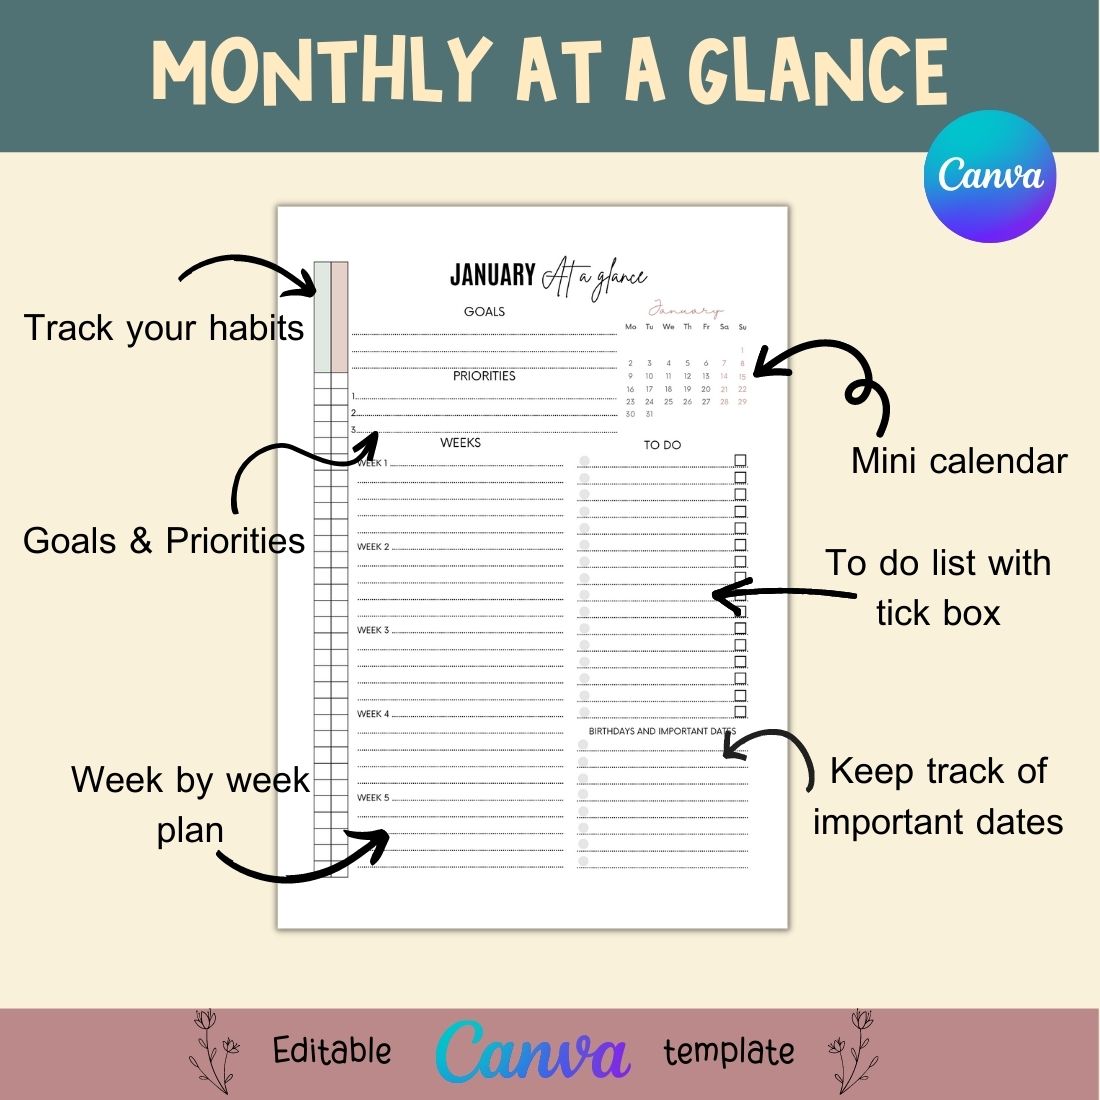 Monthly Planner Canva Templates preview image.